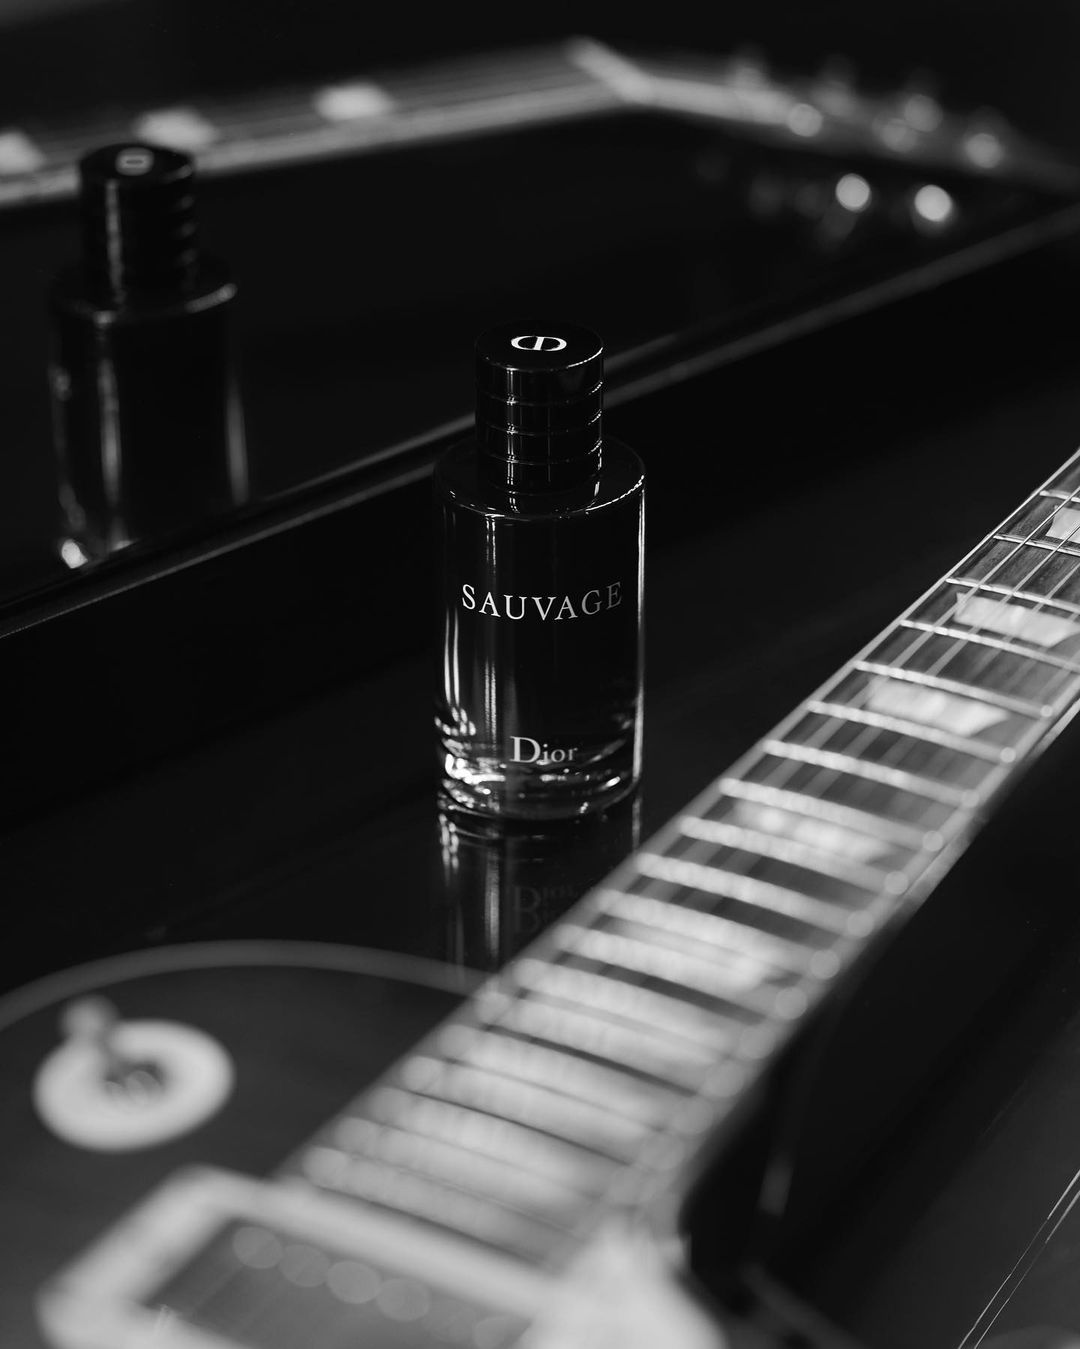 A bottle of Sauvage perfume by Dior next to a guitar - Dior